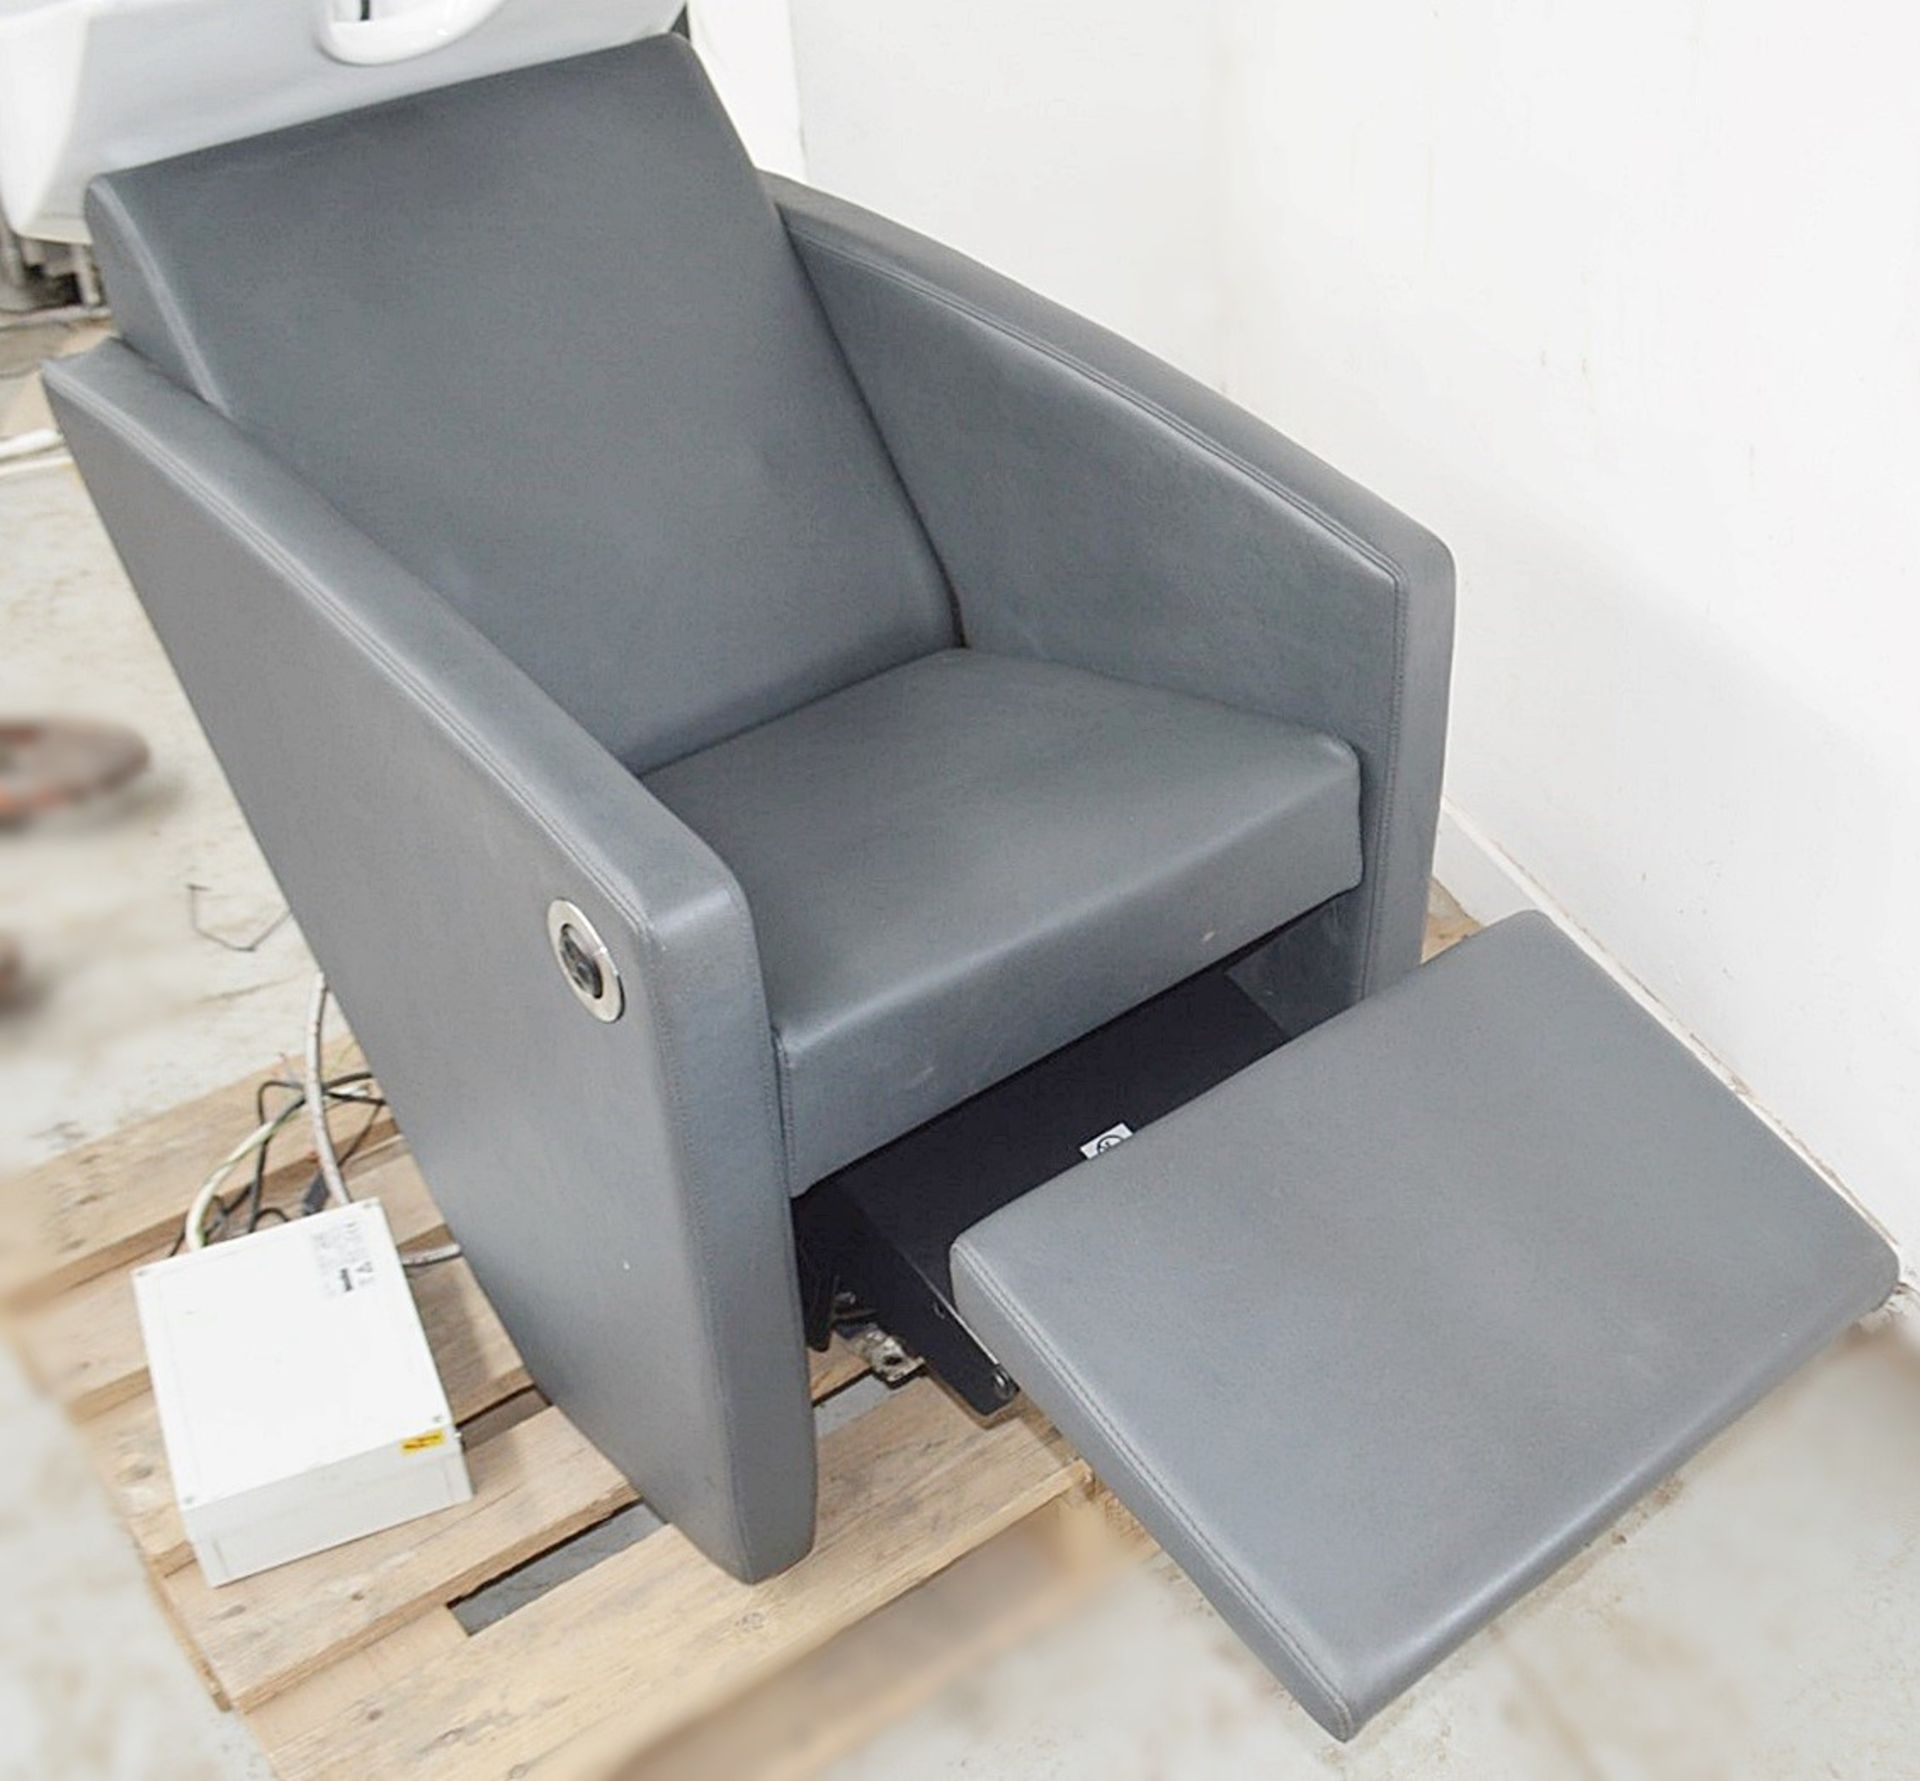 1 x Professional Reclining Hair Washing Chair With Basin Shower And Foot Rest - Image 5 of 19